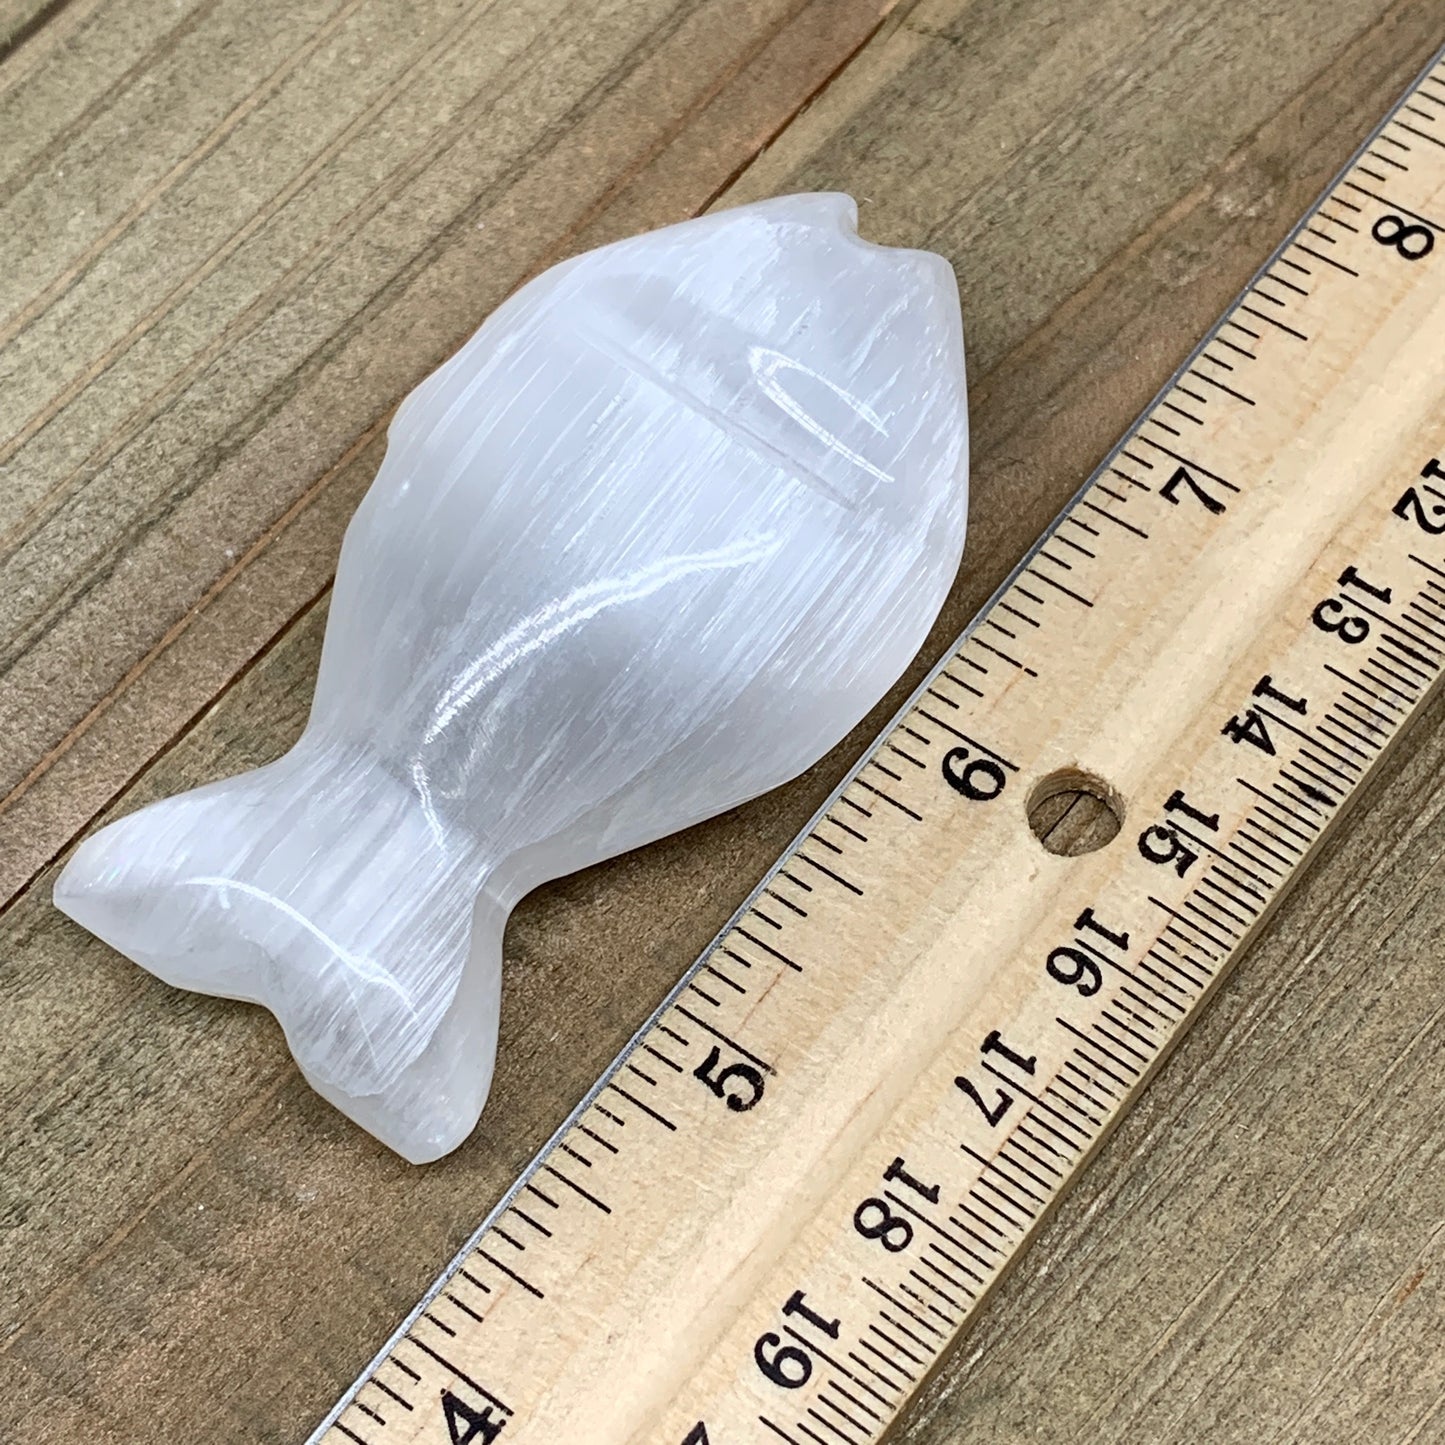 1pc, 45-60g, 2.7"x1.5"x0.9" White Selenite Fish, Handcrafted Crystal @Morocco